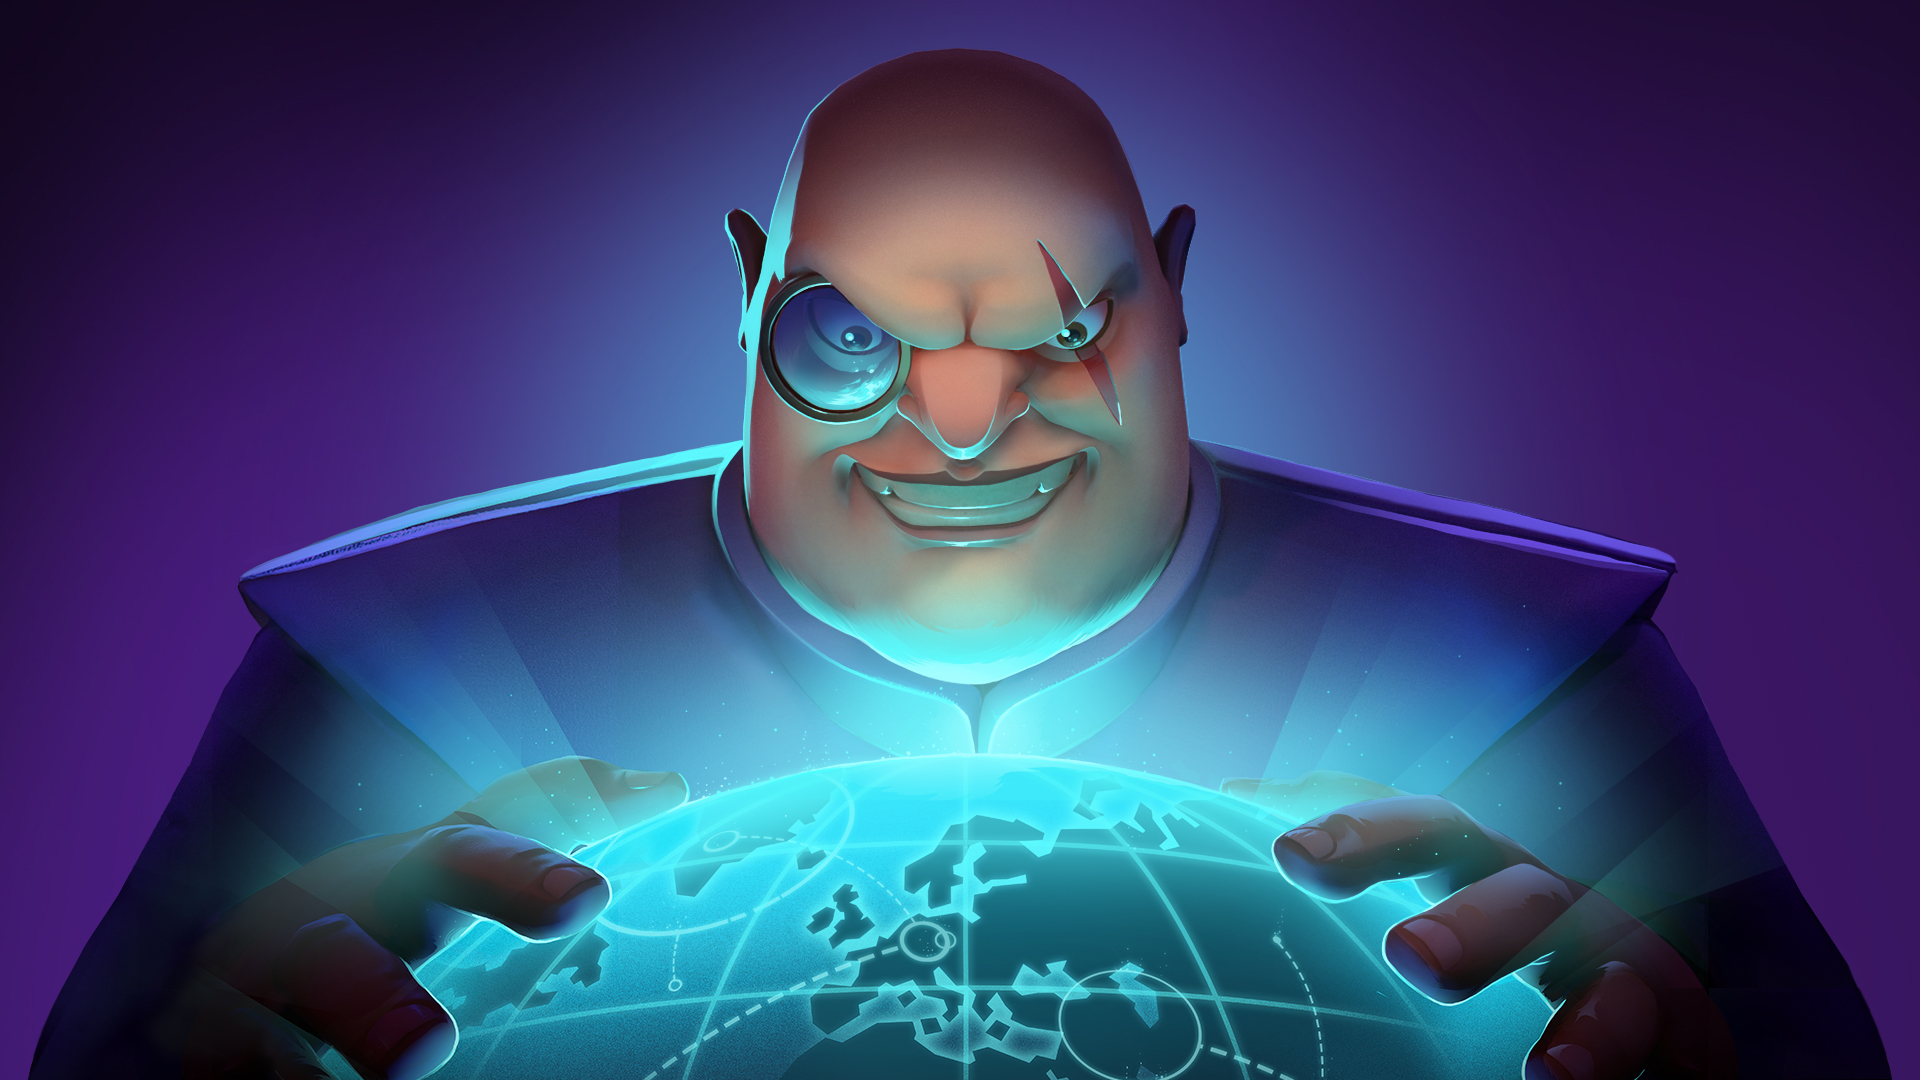 Evil Genius 2 Unveils A Full Schedule Of Secrets To Be Revealed!